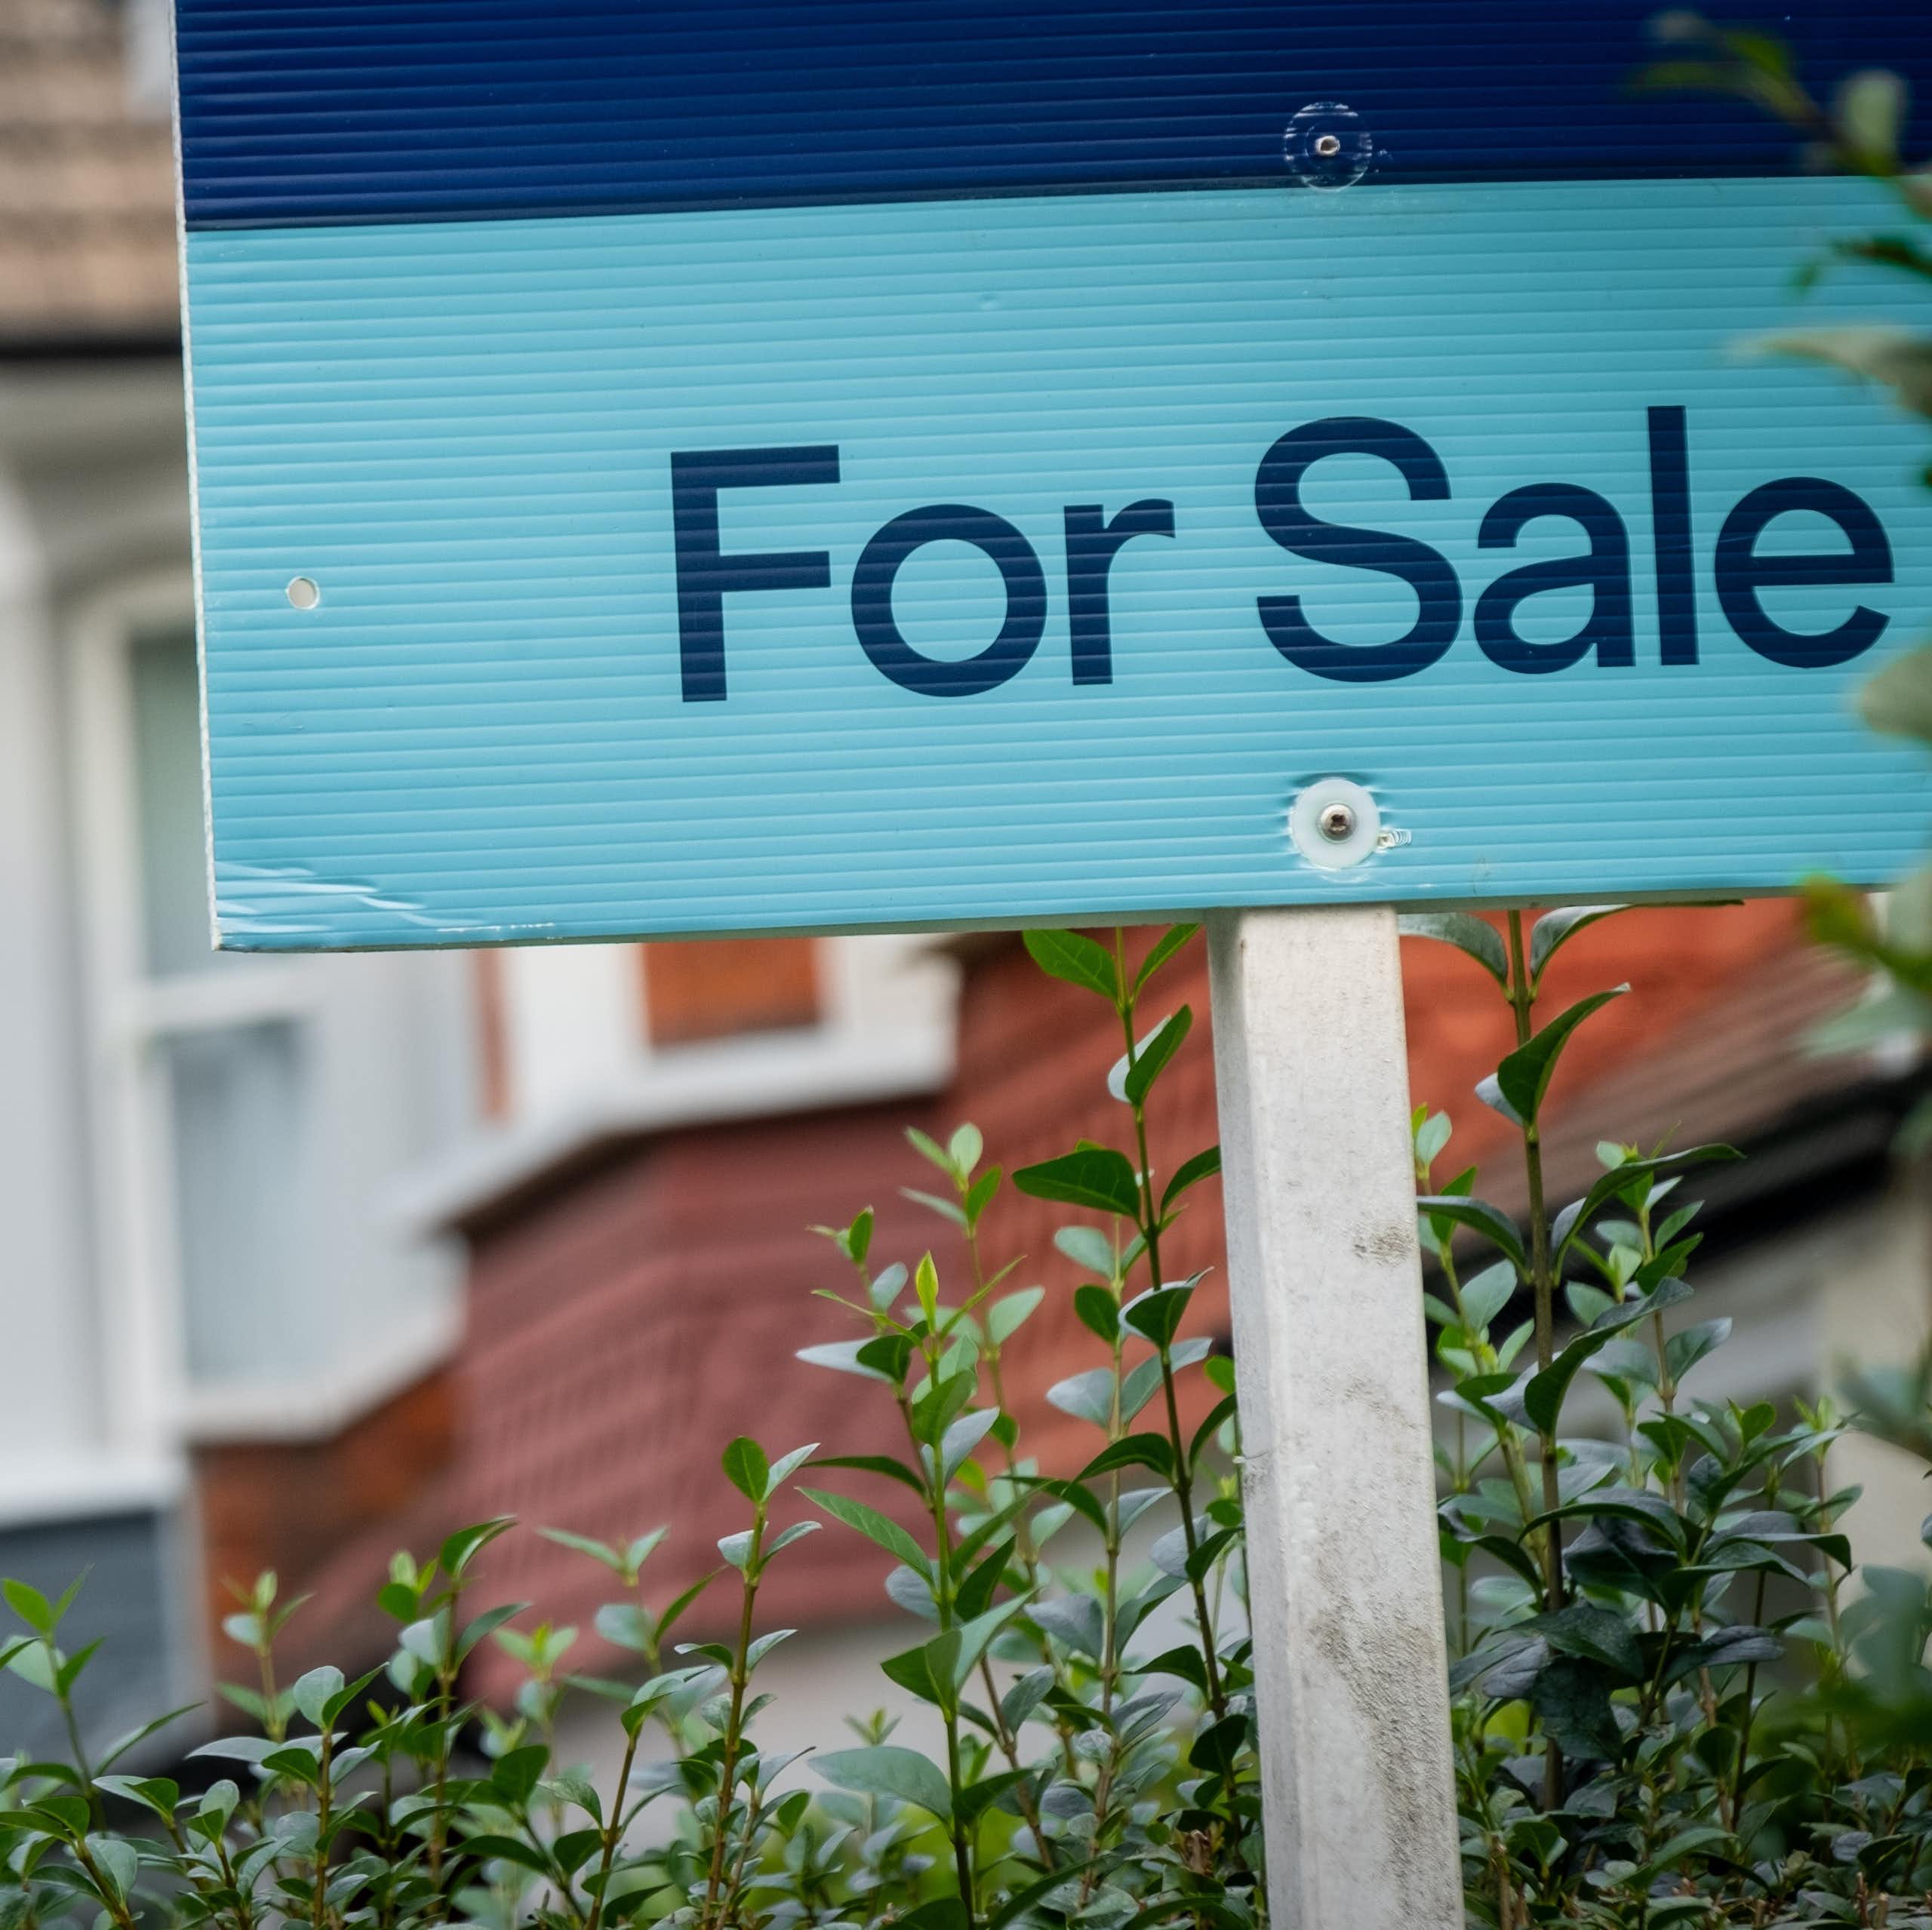 Falling house prices won’t open new doors – for buyers or renters